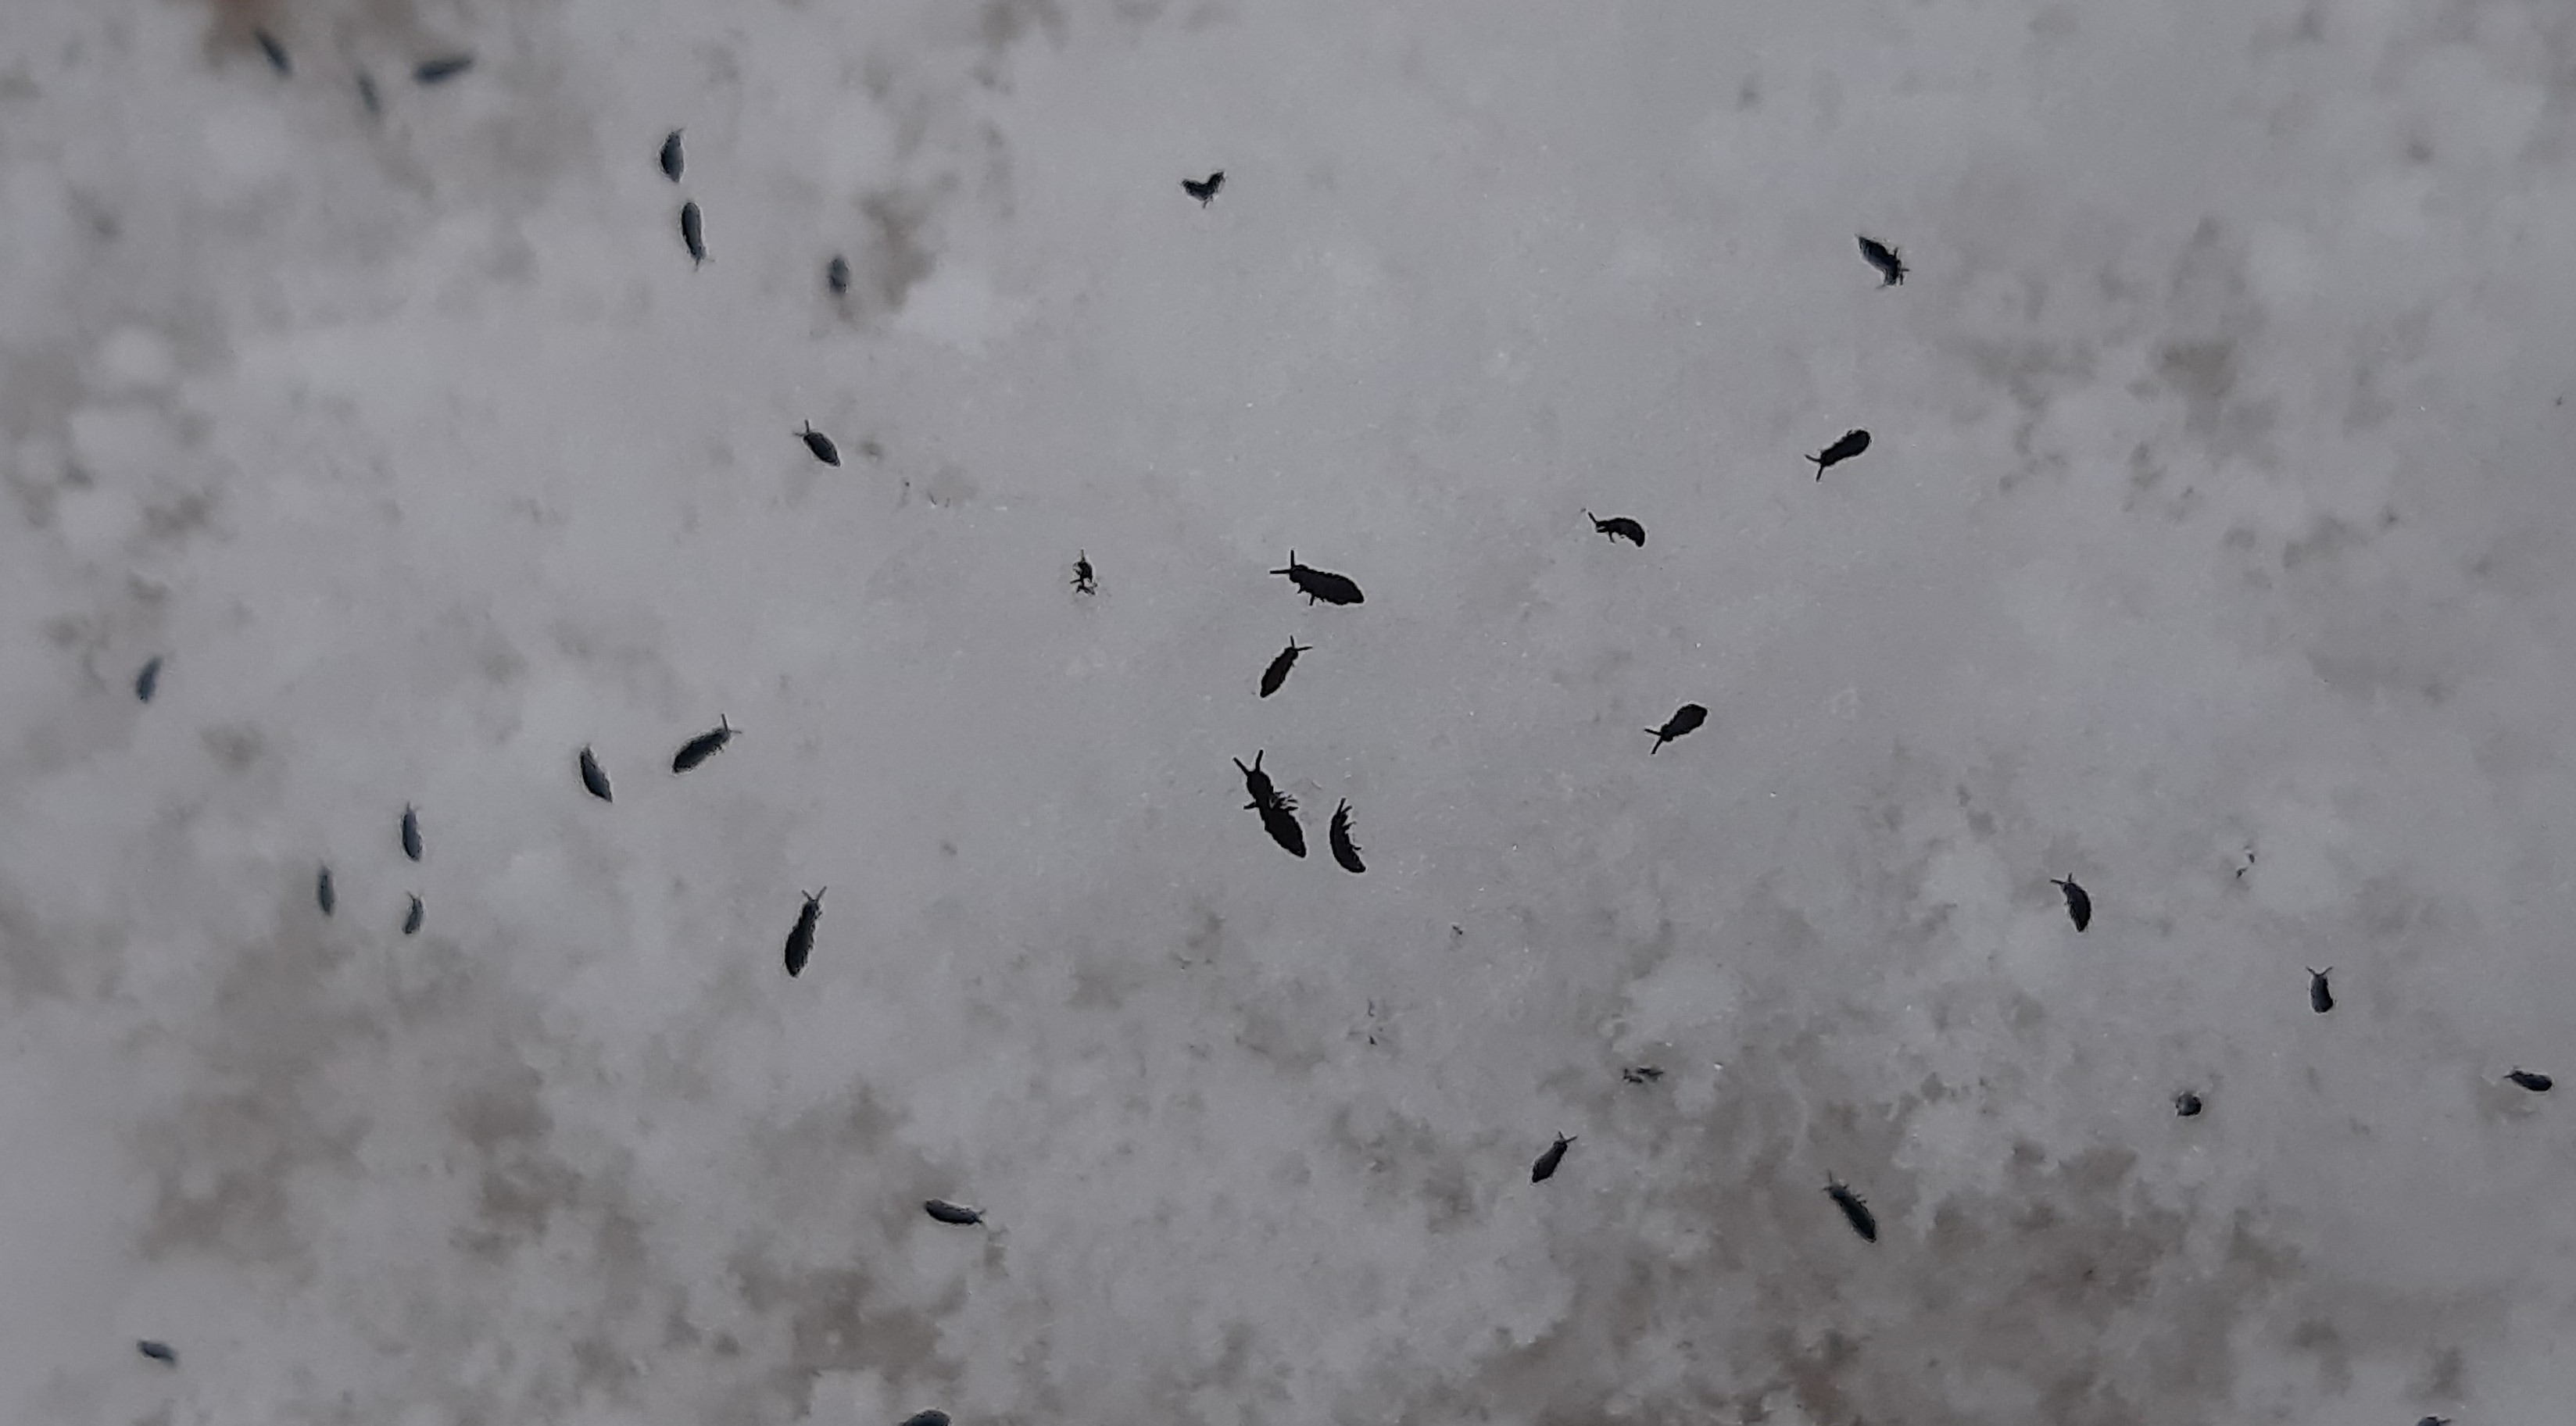 Close up image of snow fleas, with legs and antennae visible